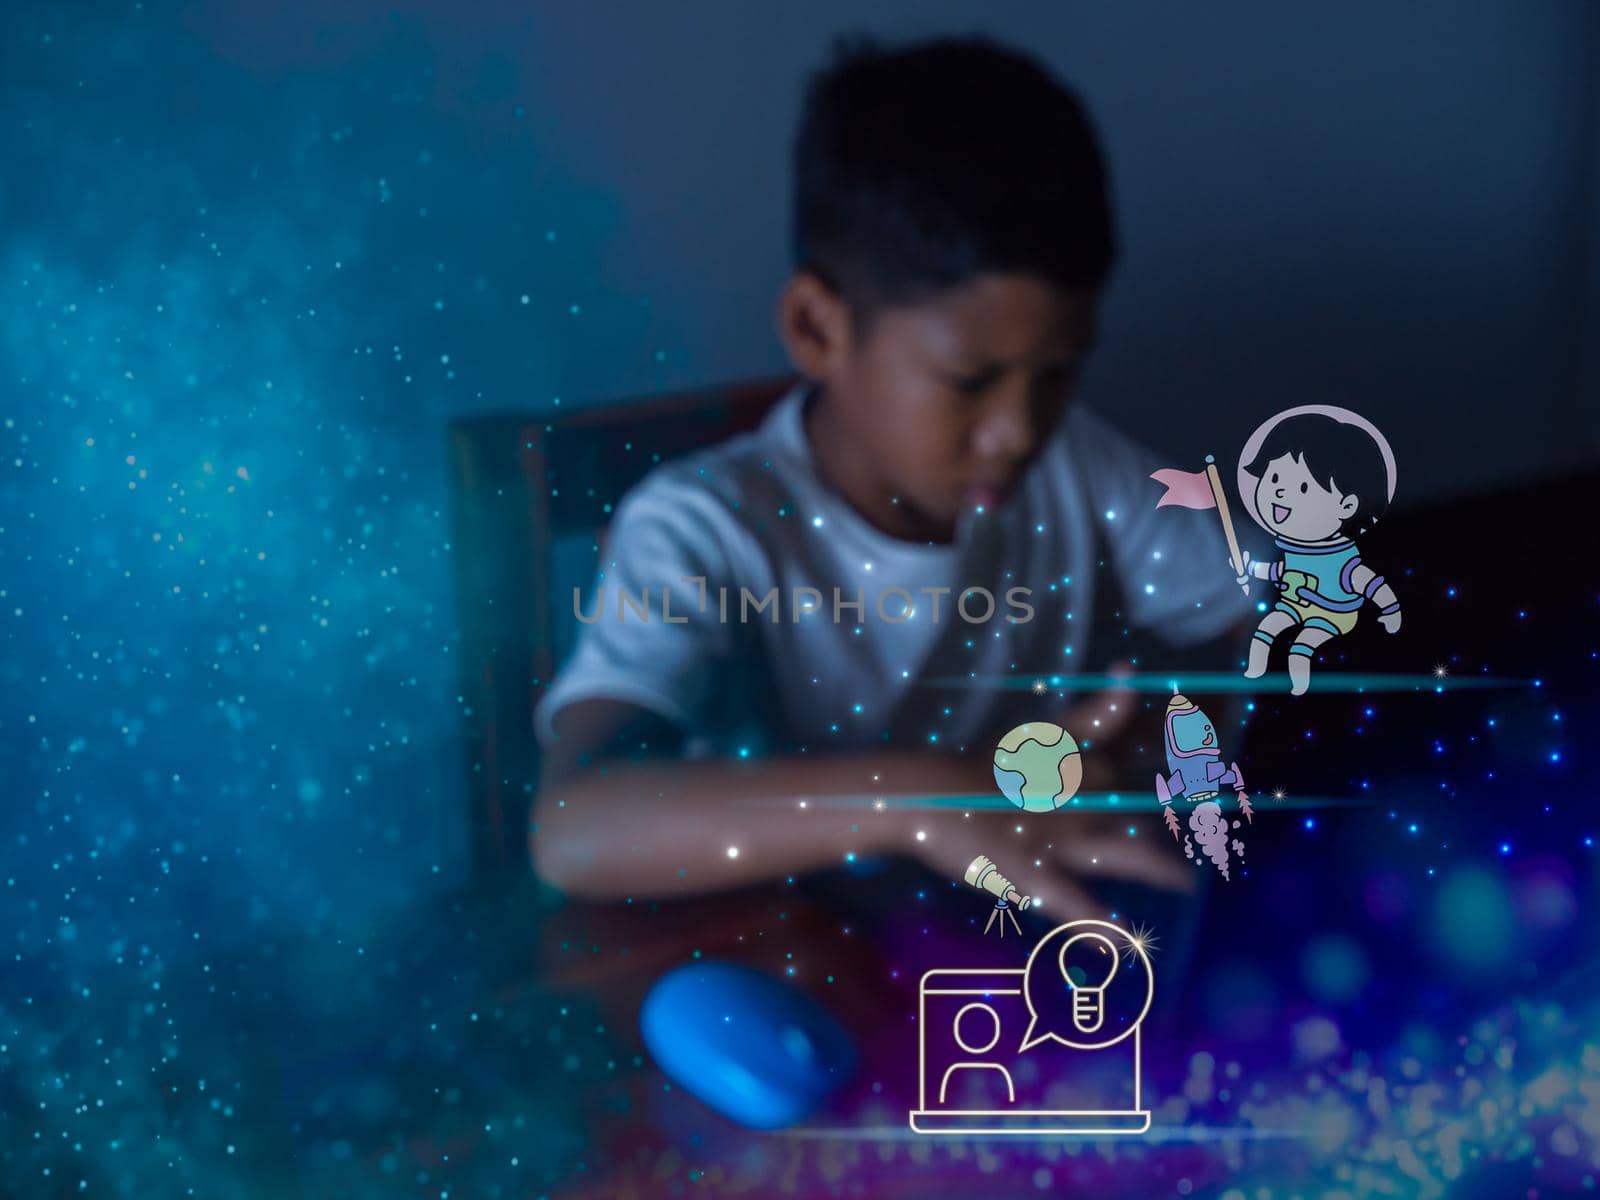 education icon On the background of blurry pictures a boy is staring at a computer monitor. educational concept, educational information search, copy space